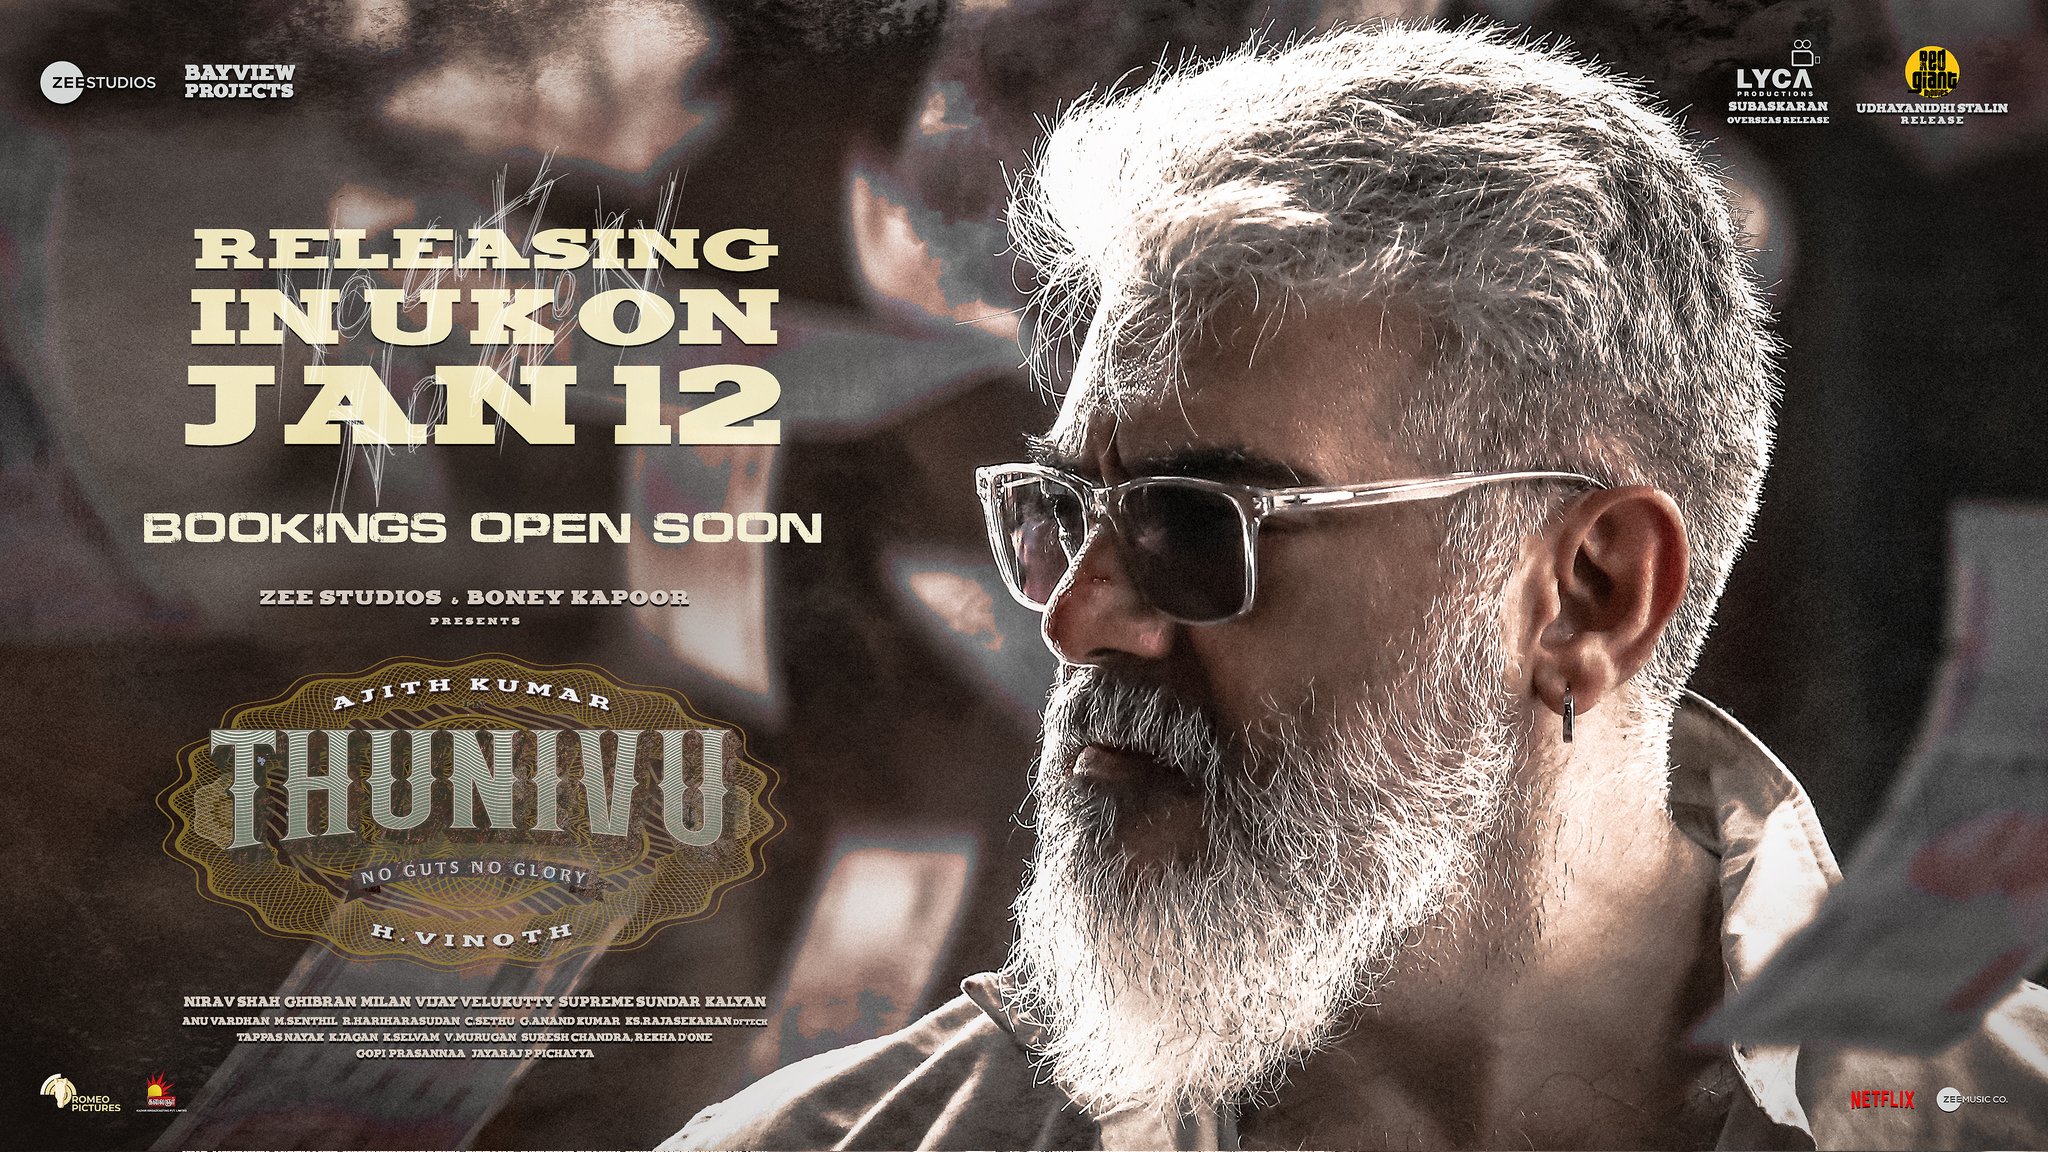 Cinetrak on Twitter: "' @BayViewProjOffl's #Thunivu in Tamil Nadu bags 'Second Highest Opening day' for Ajith, film grossed ₹21 crore aprx on Wednesday in the state. https://t.co/Xc3uZ7tVHk" / Twitter